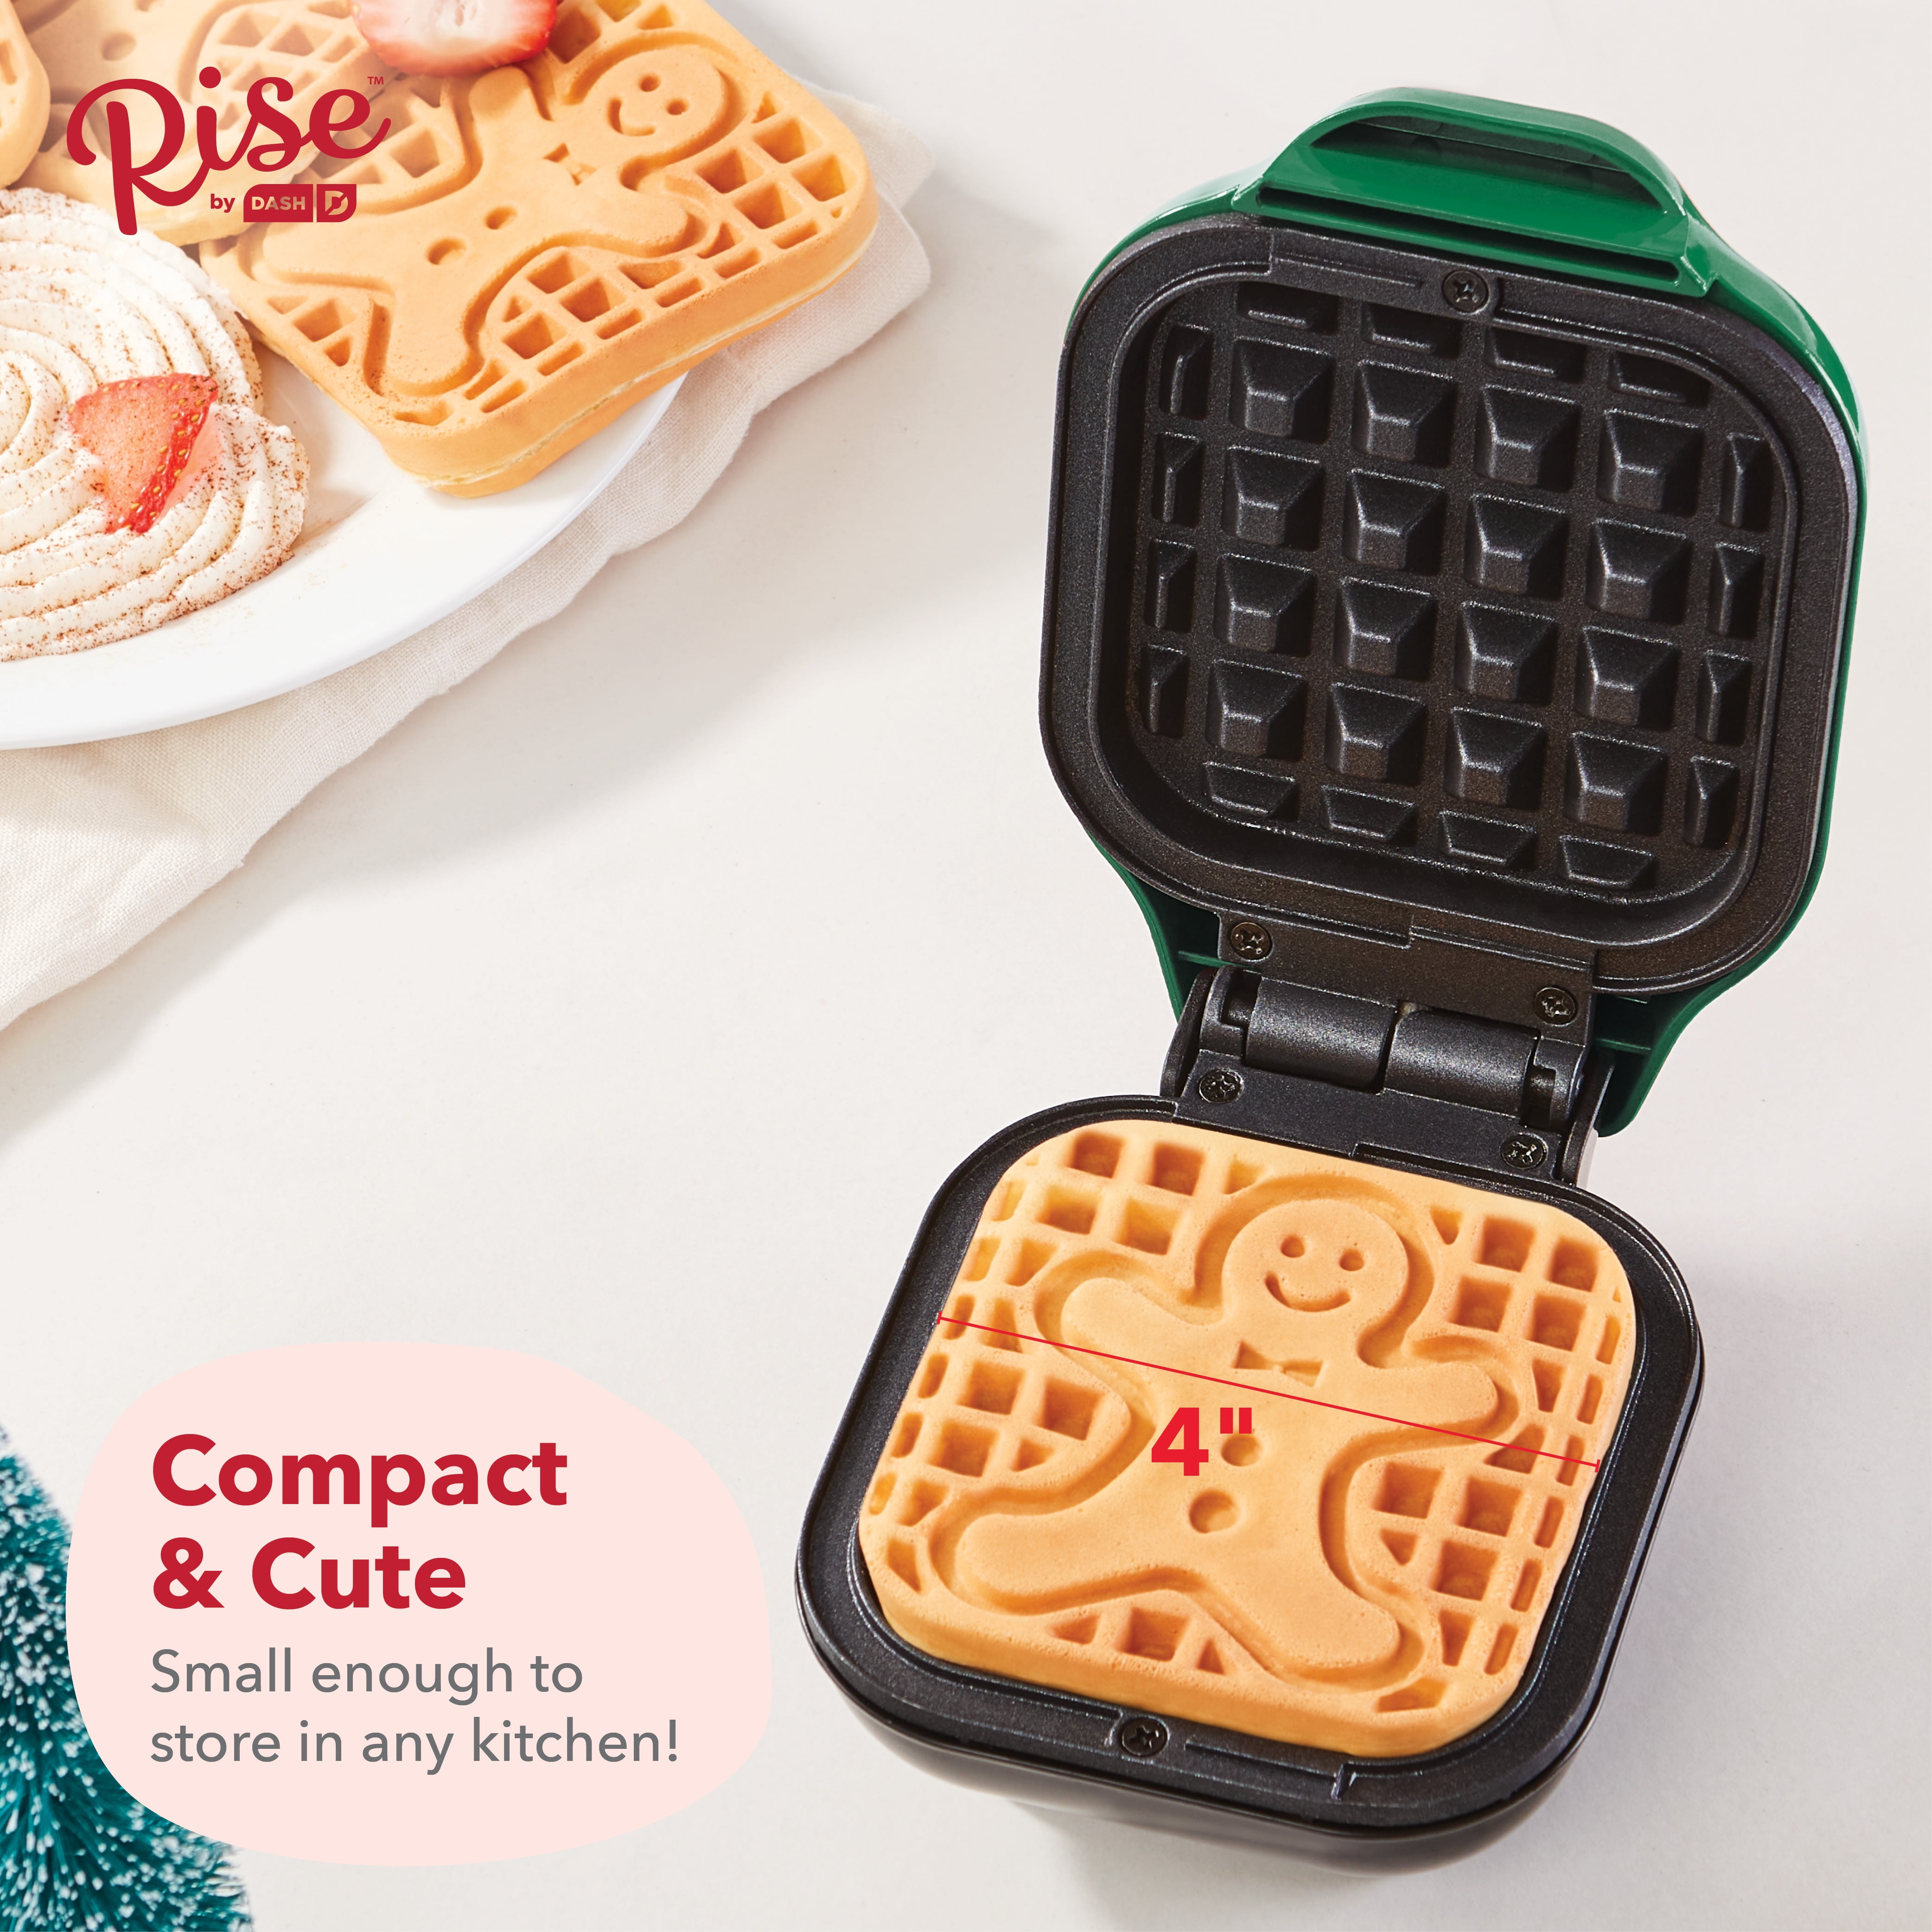 Mini Waffle Maker Gingerbread Man by Dash 4 Cooking Surface